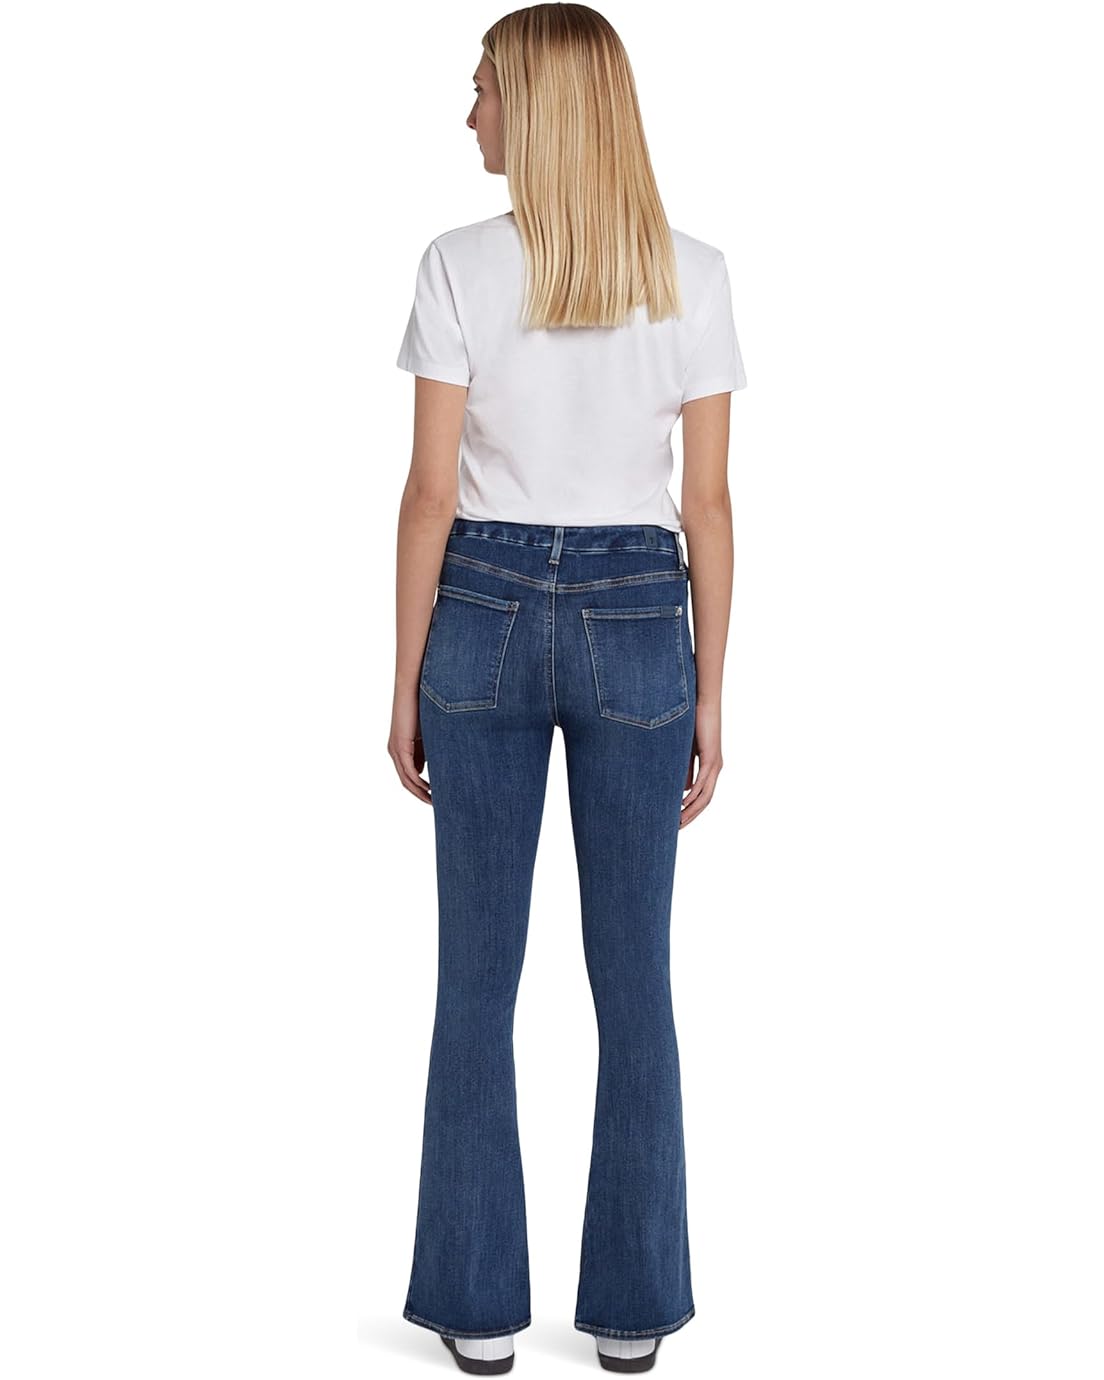  7 For All Mankind Ultra High-Rise Skinny Boot Tailorless in Blue Star